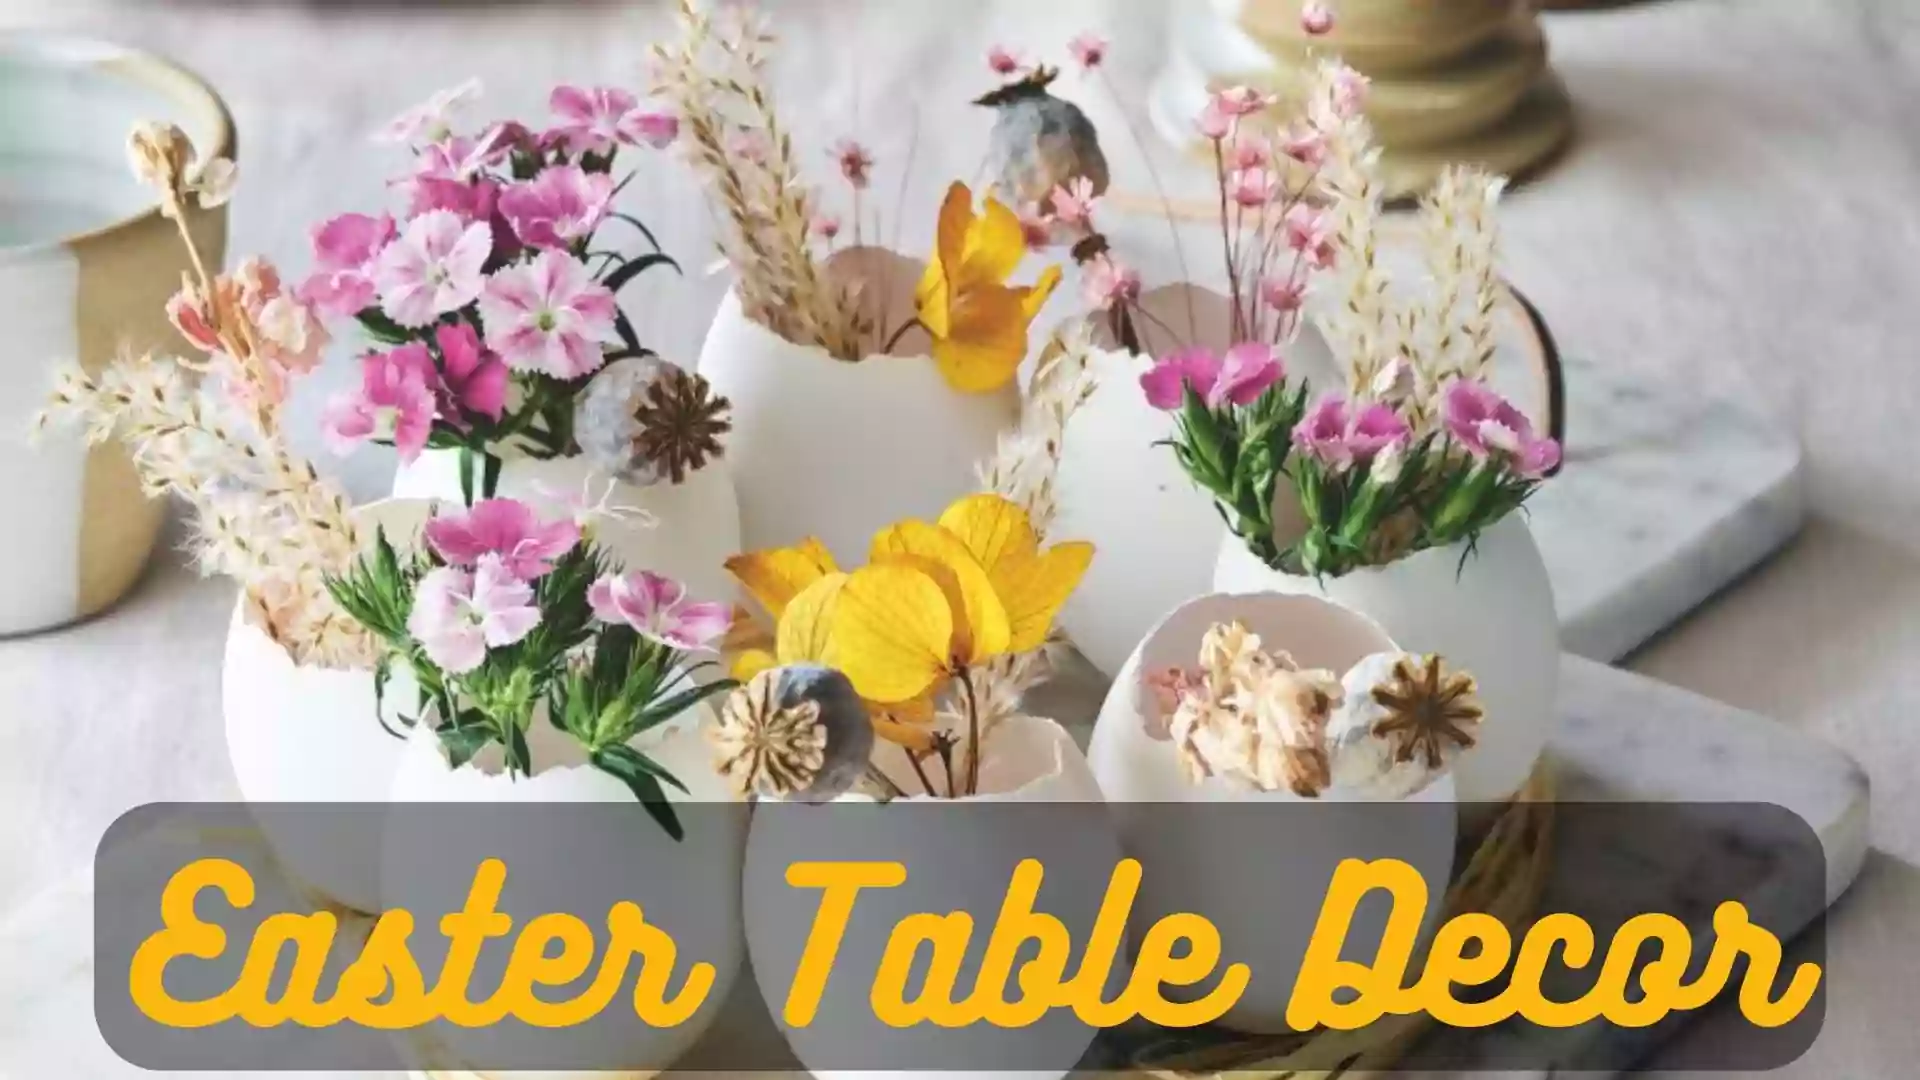 Easter Table Decor | Easter Table Decor 2022